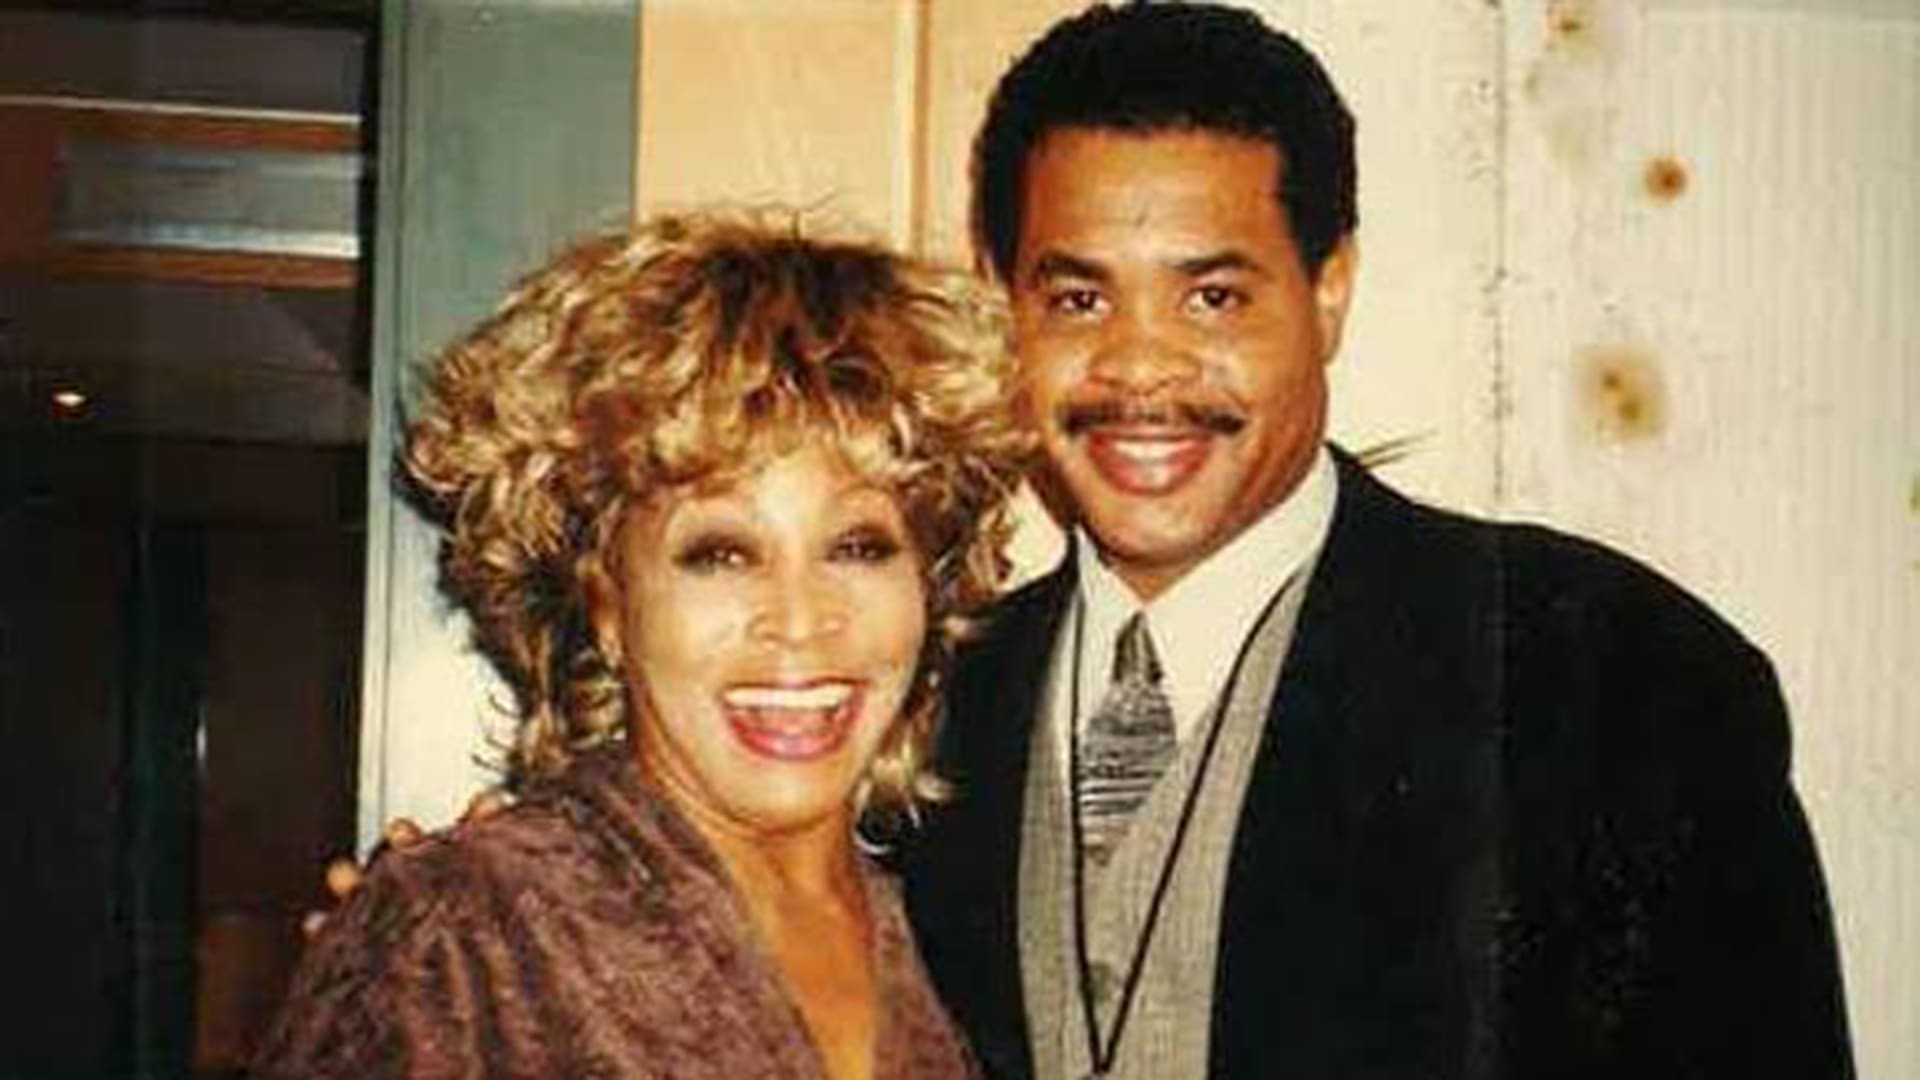 tina-turner-on-her-son-who-committed-suicide-i-think-he-was-lonely